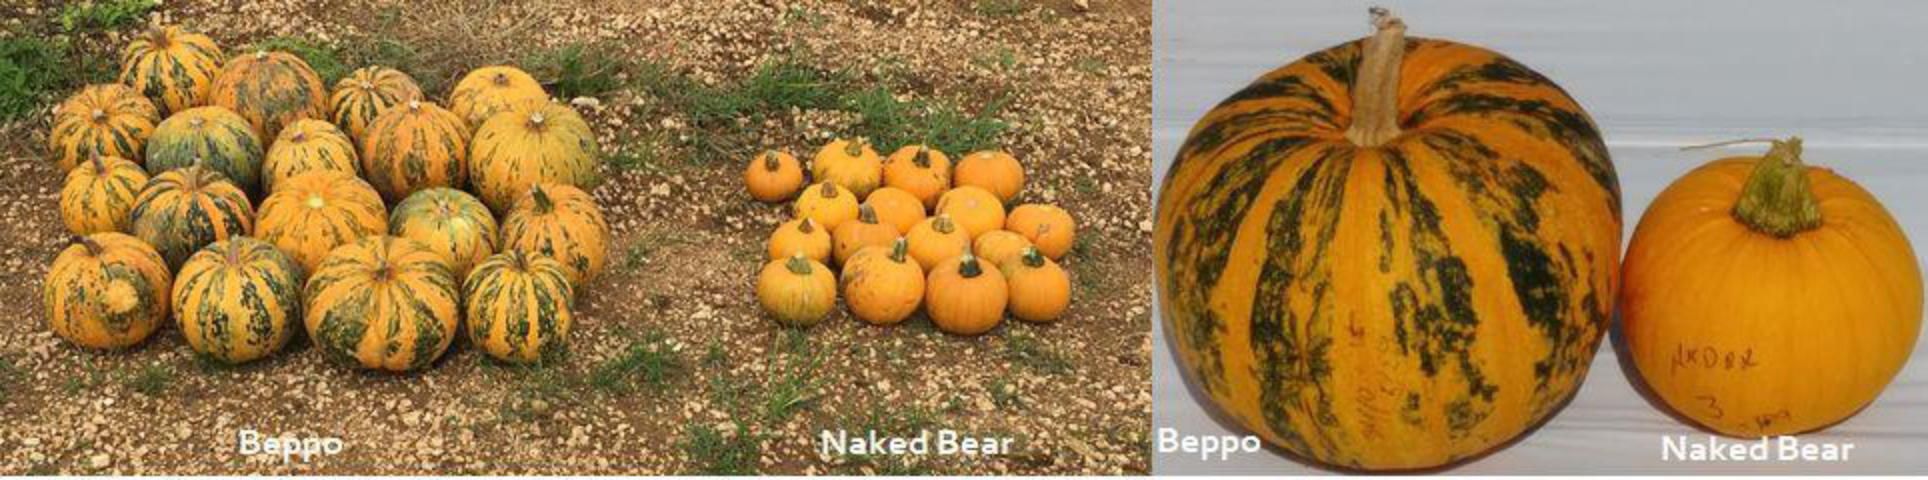 Figure 3. Differences in fruit rind color and fruit size between 'Beppo' and 'Naked Bear' cultivars.